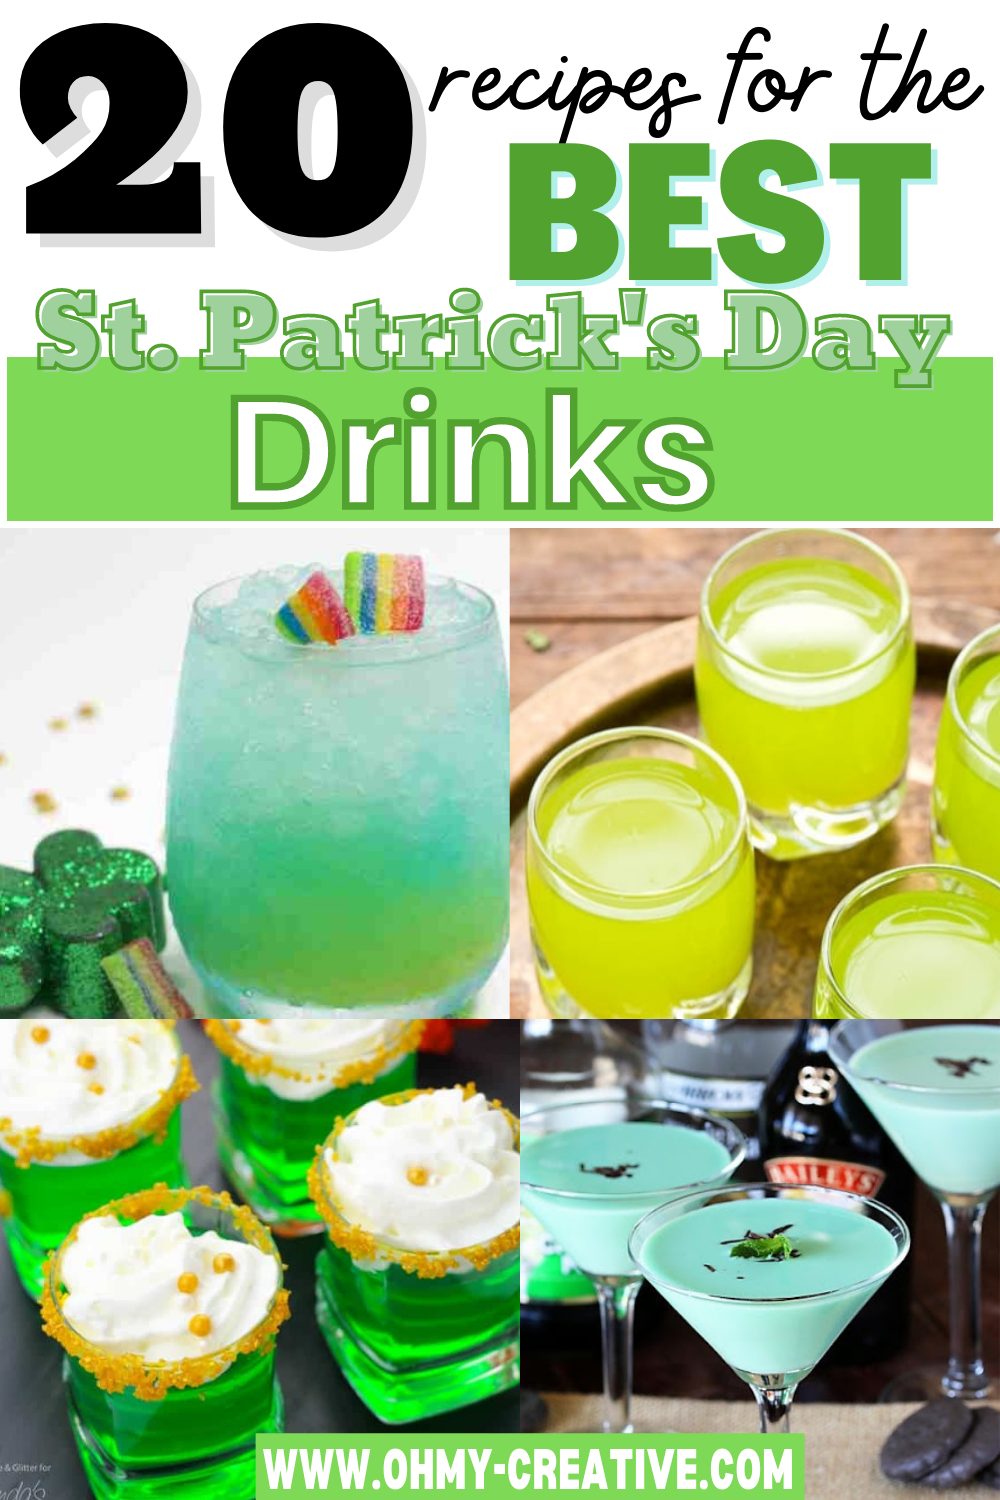 St Patrick's Day Drinks featuring green cocktails, green boozy shakes, green jello shots, and more.